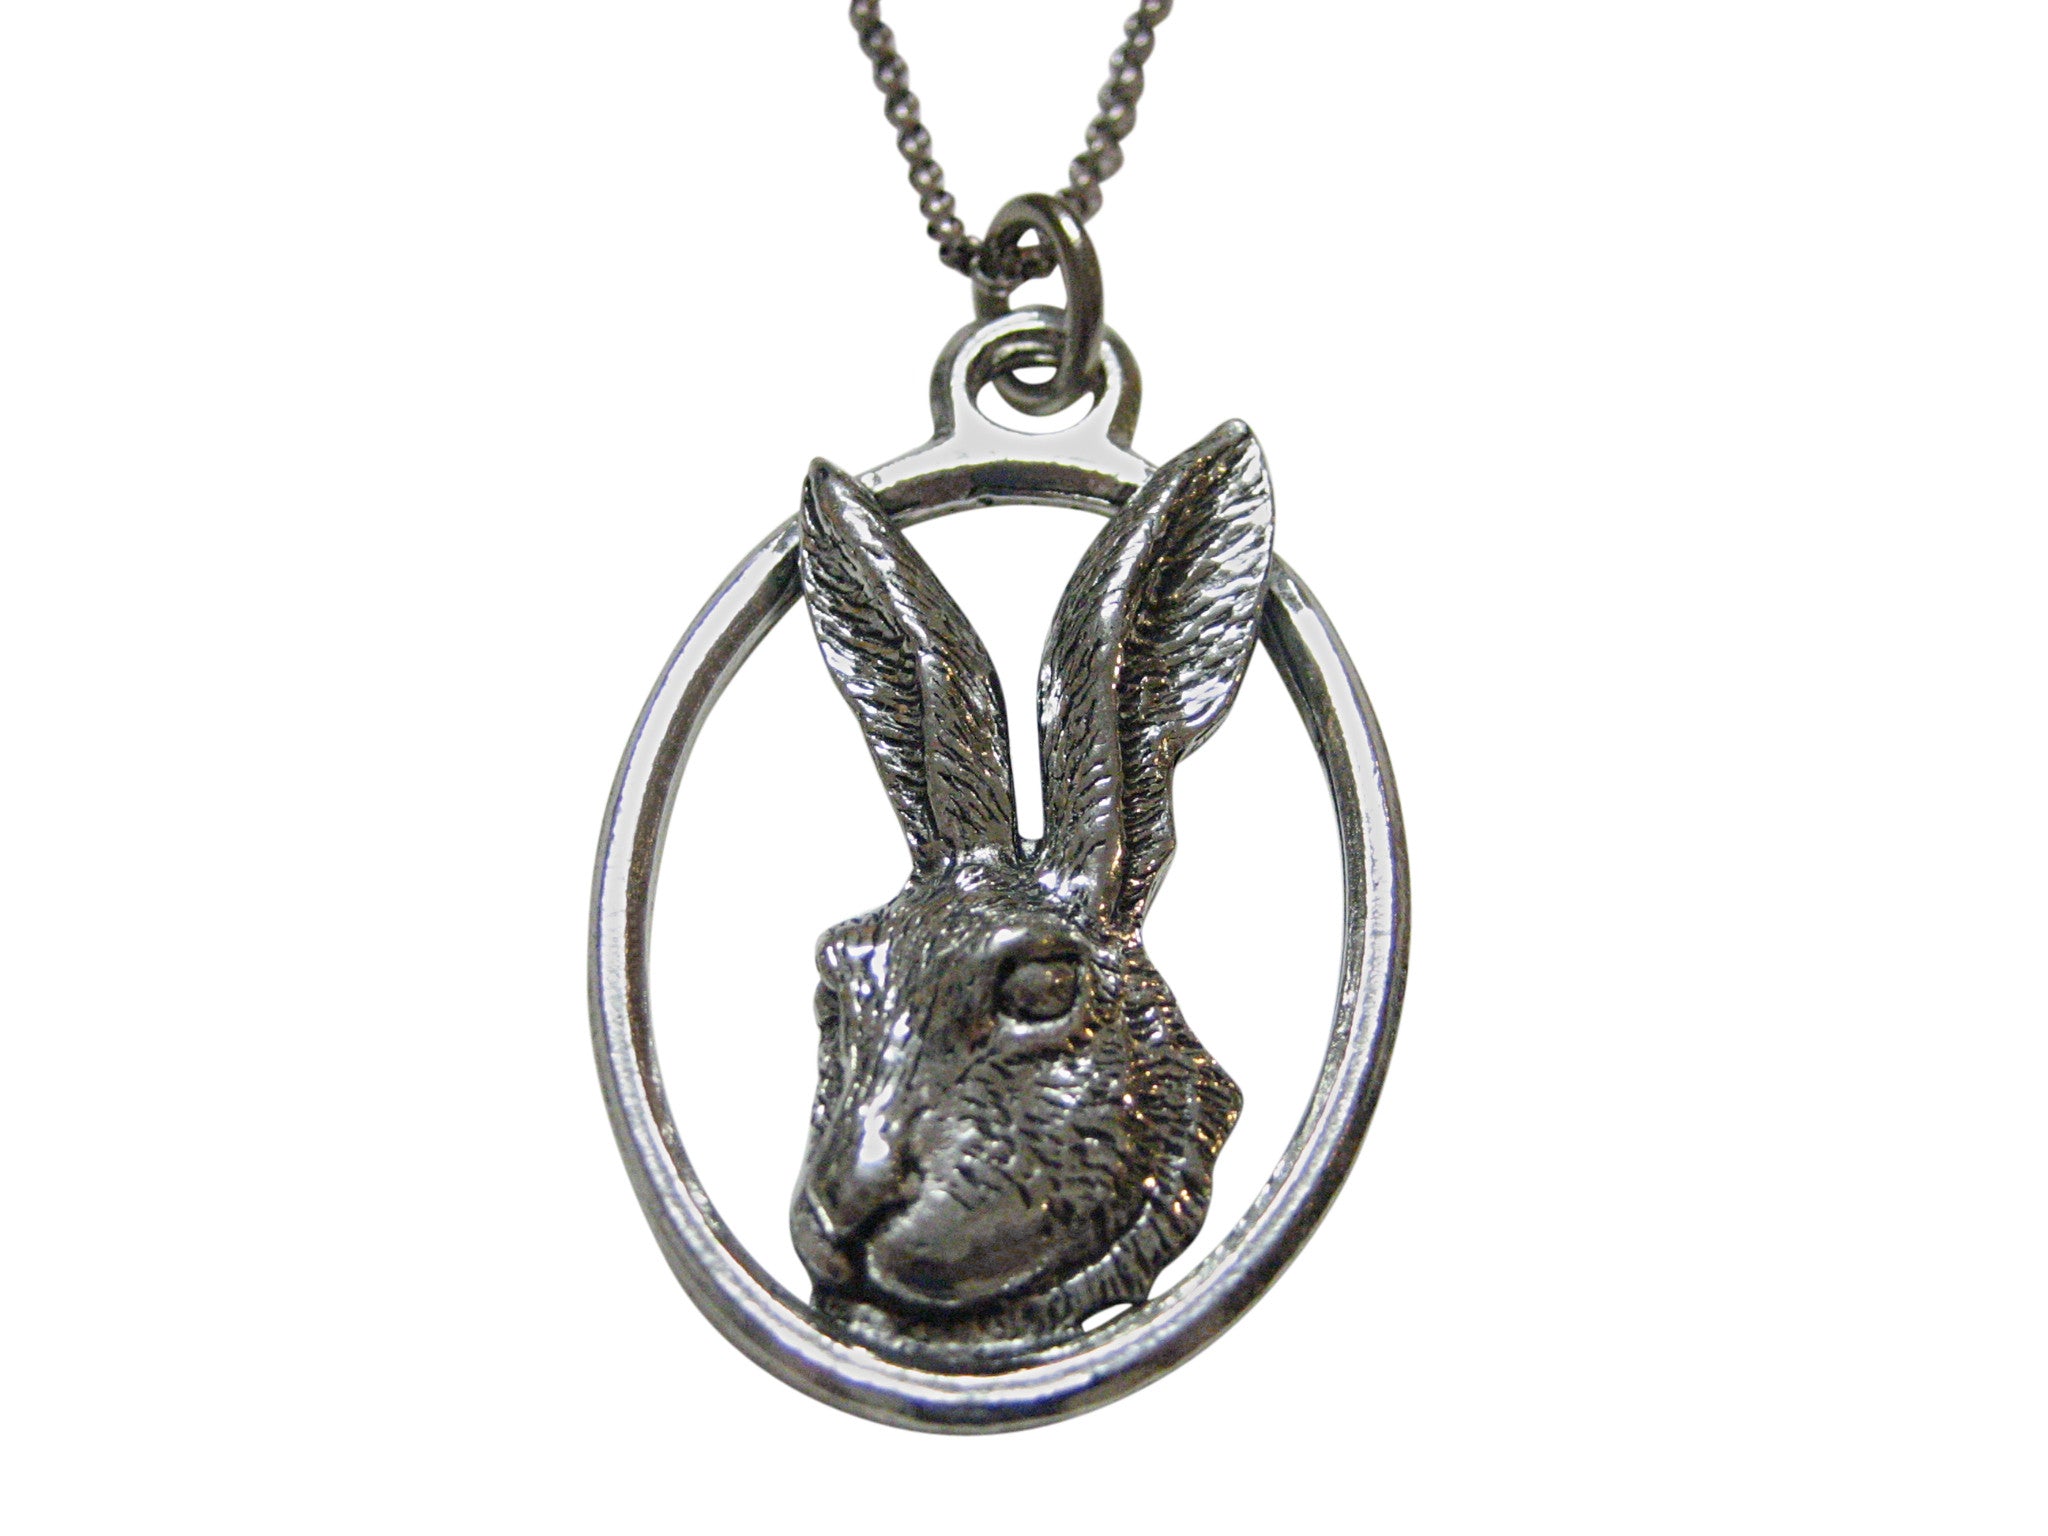 Hare Rabbit Large Oval Pendant Necklace